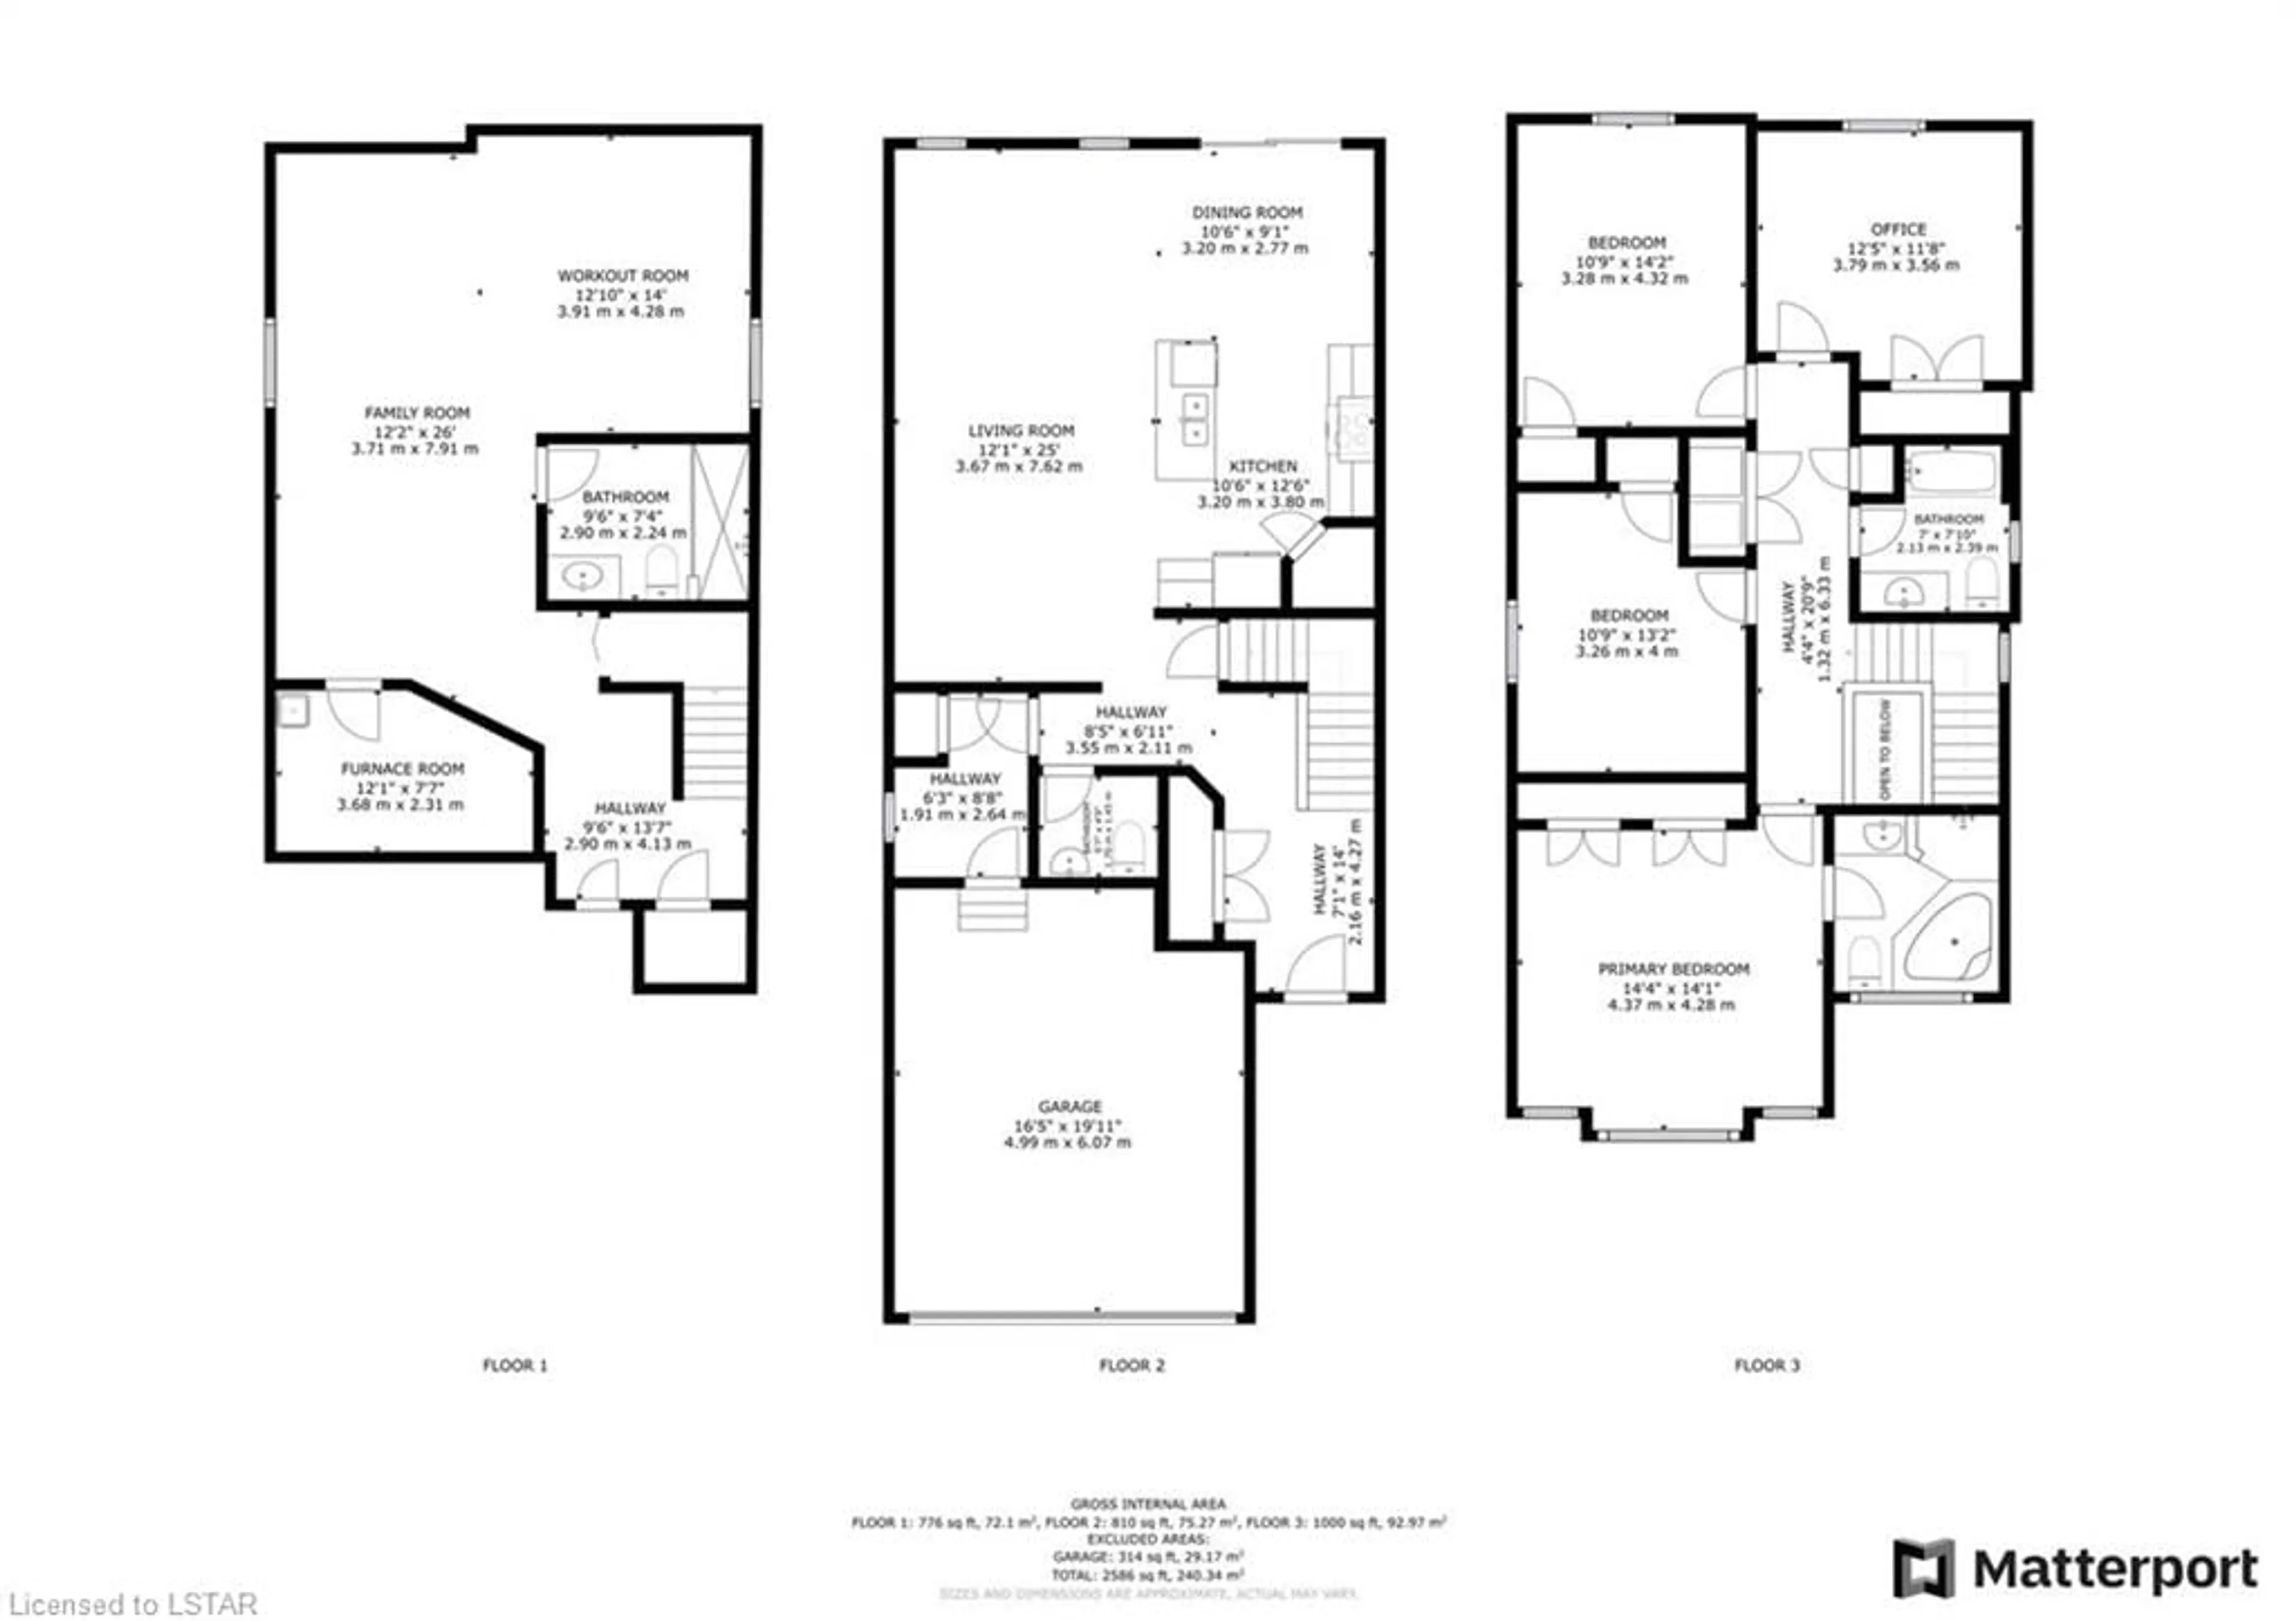 Floor plan for 3261 Casson Way, London Ontario N6L 0A3